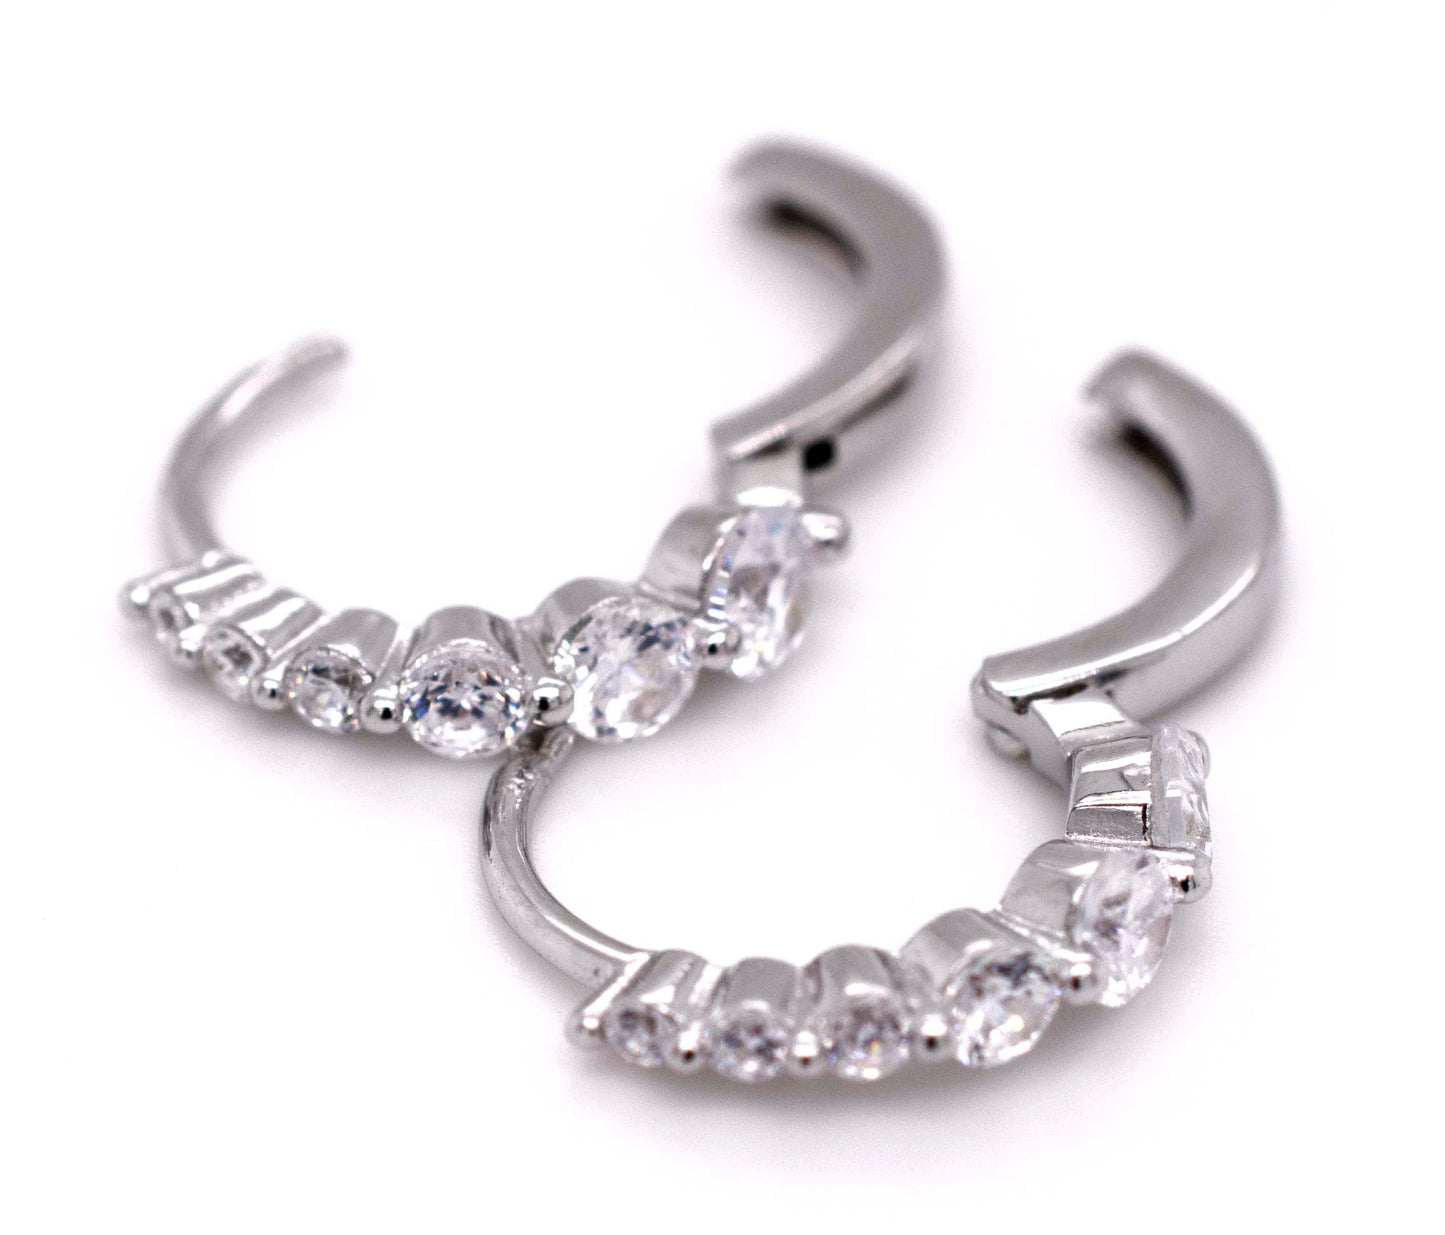 A pair of Super Silver Small Cubic Zirconia Hoops, made of white gold.